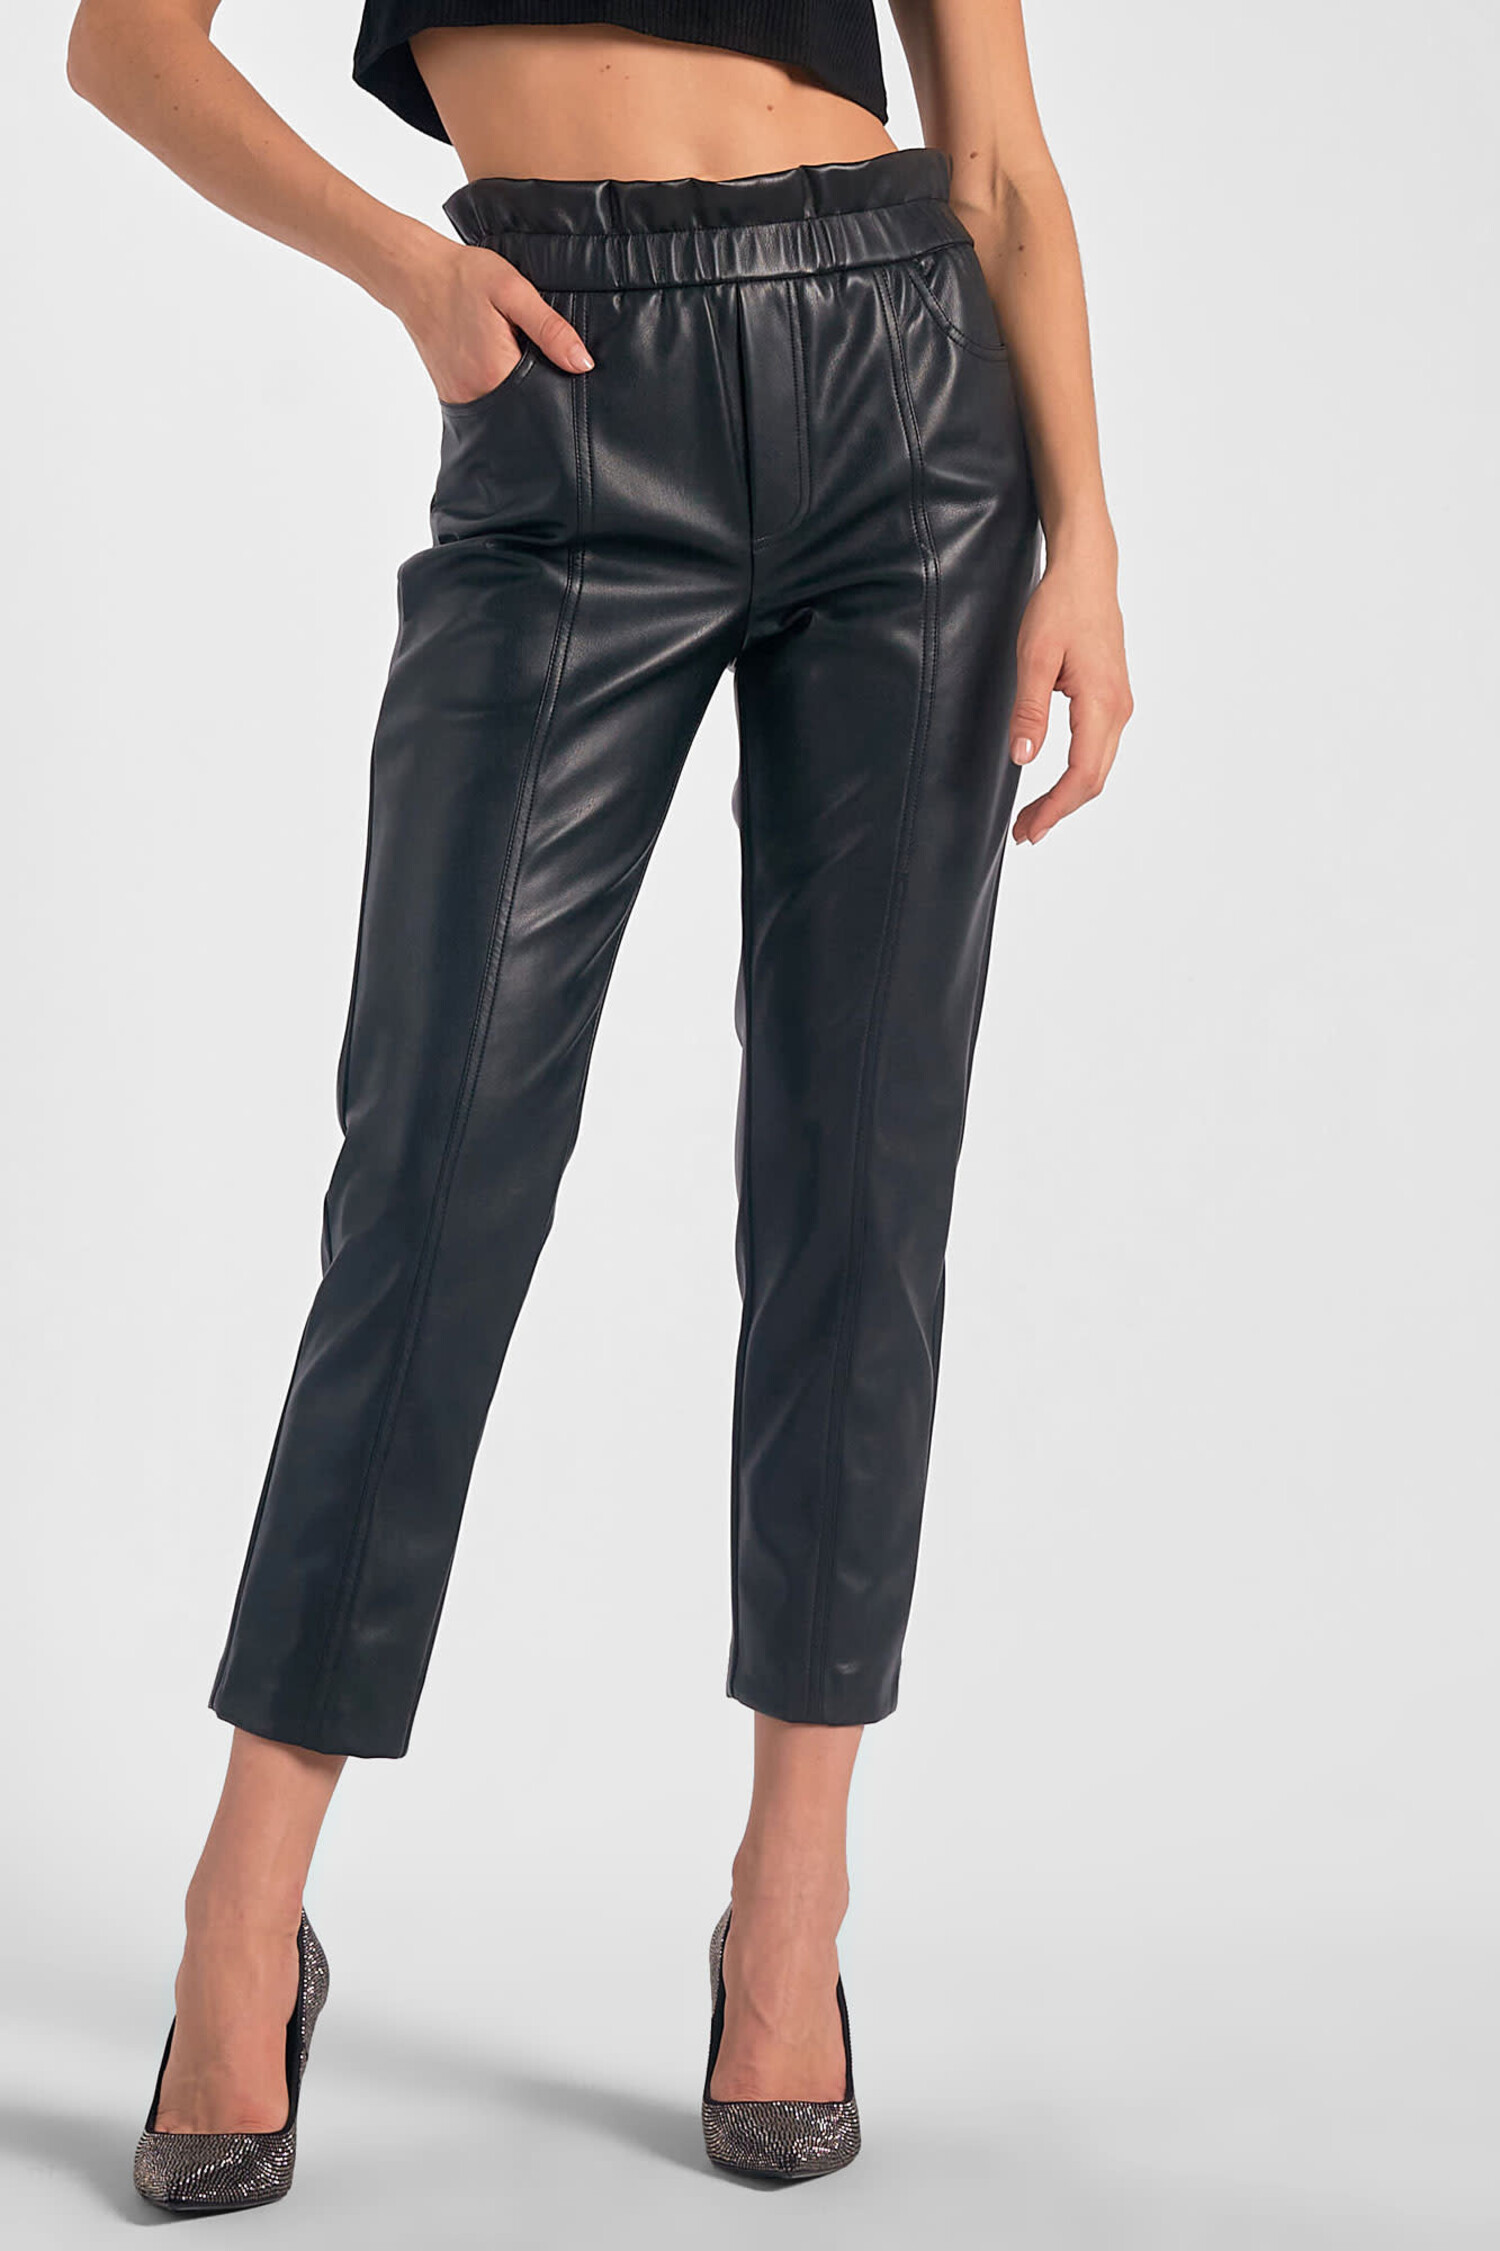 BLACK LEATHER PANTS WITH WAIST DETAIL